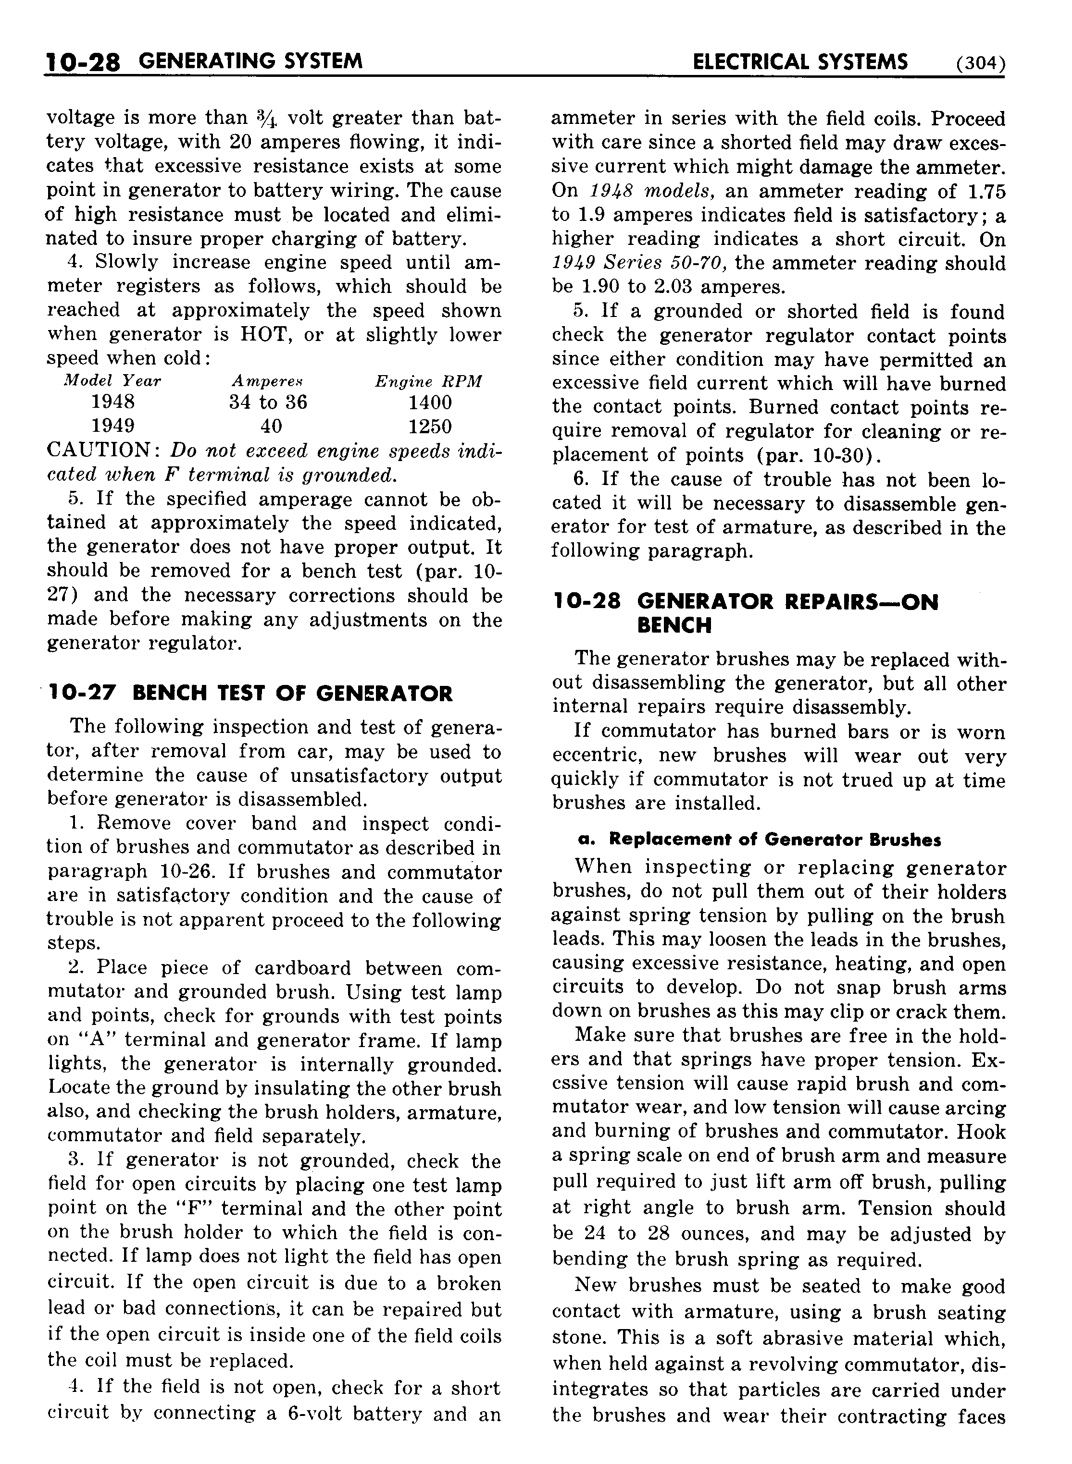 n_11 1948 Buick Shop Manual - Electrical Systems-028-028.jpg